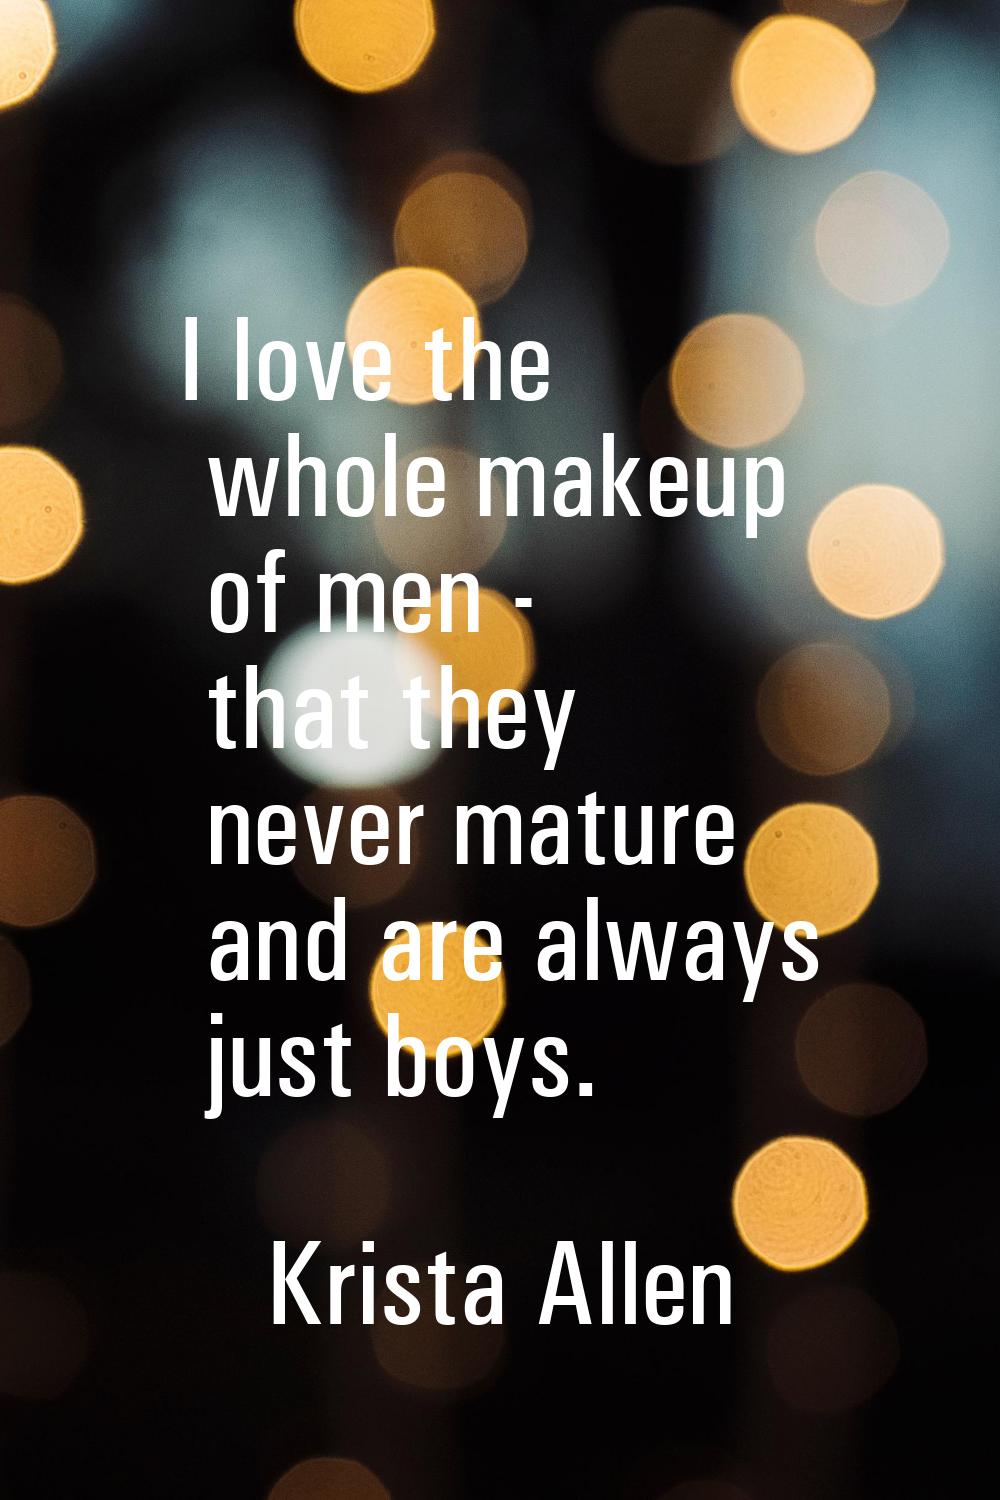 I love the whole makeup of men - that they never mature and are always just boys.